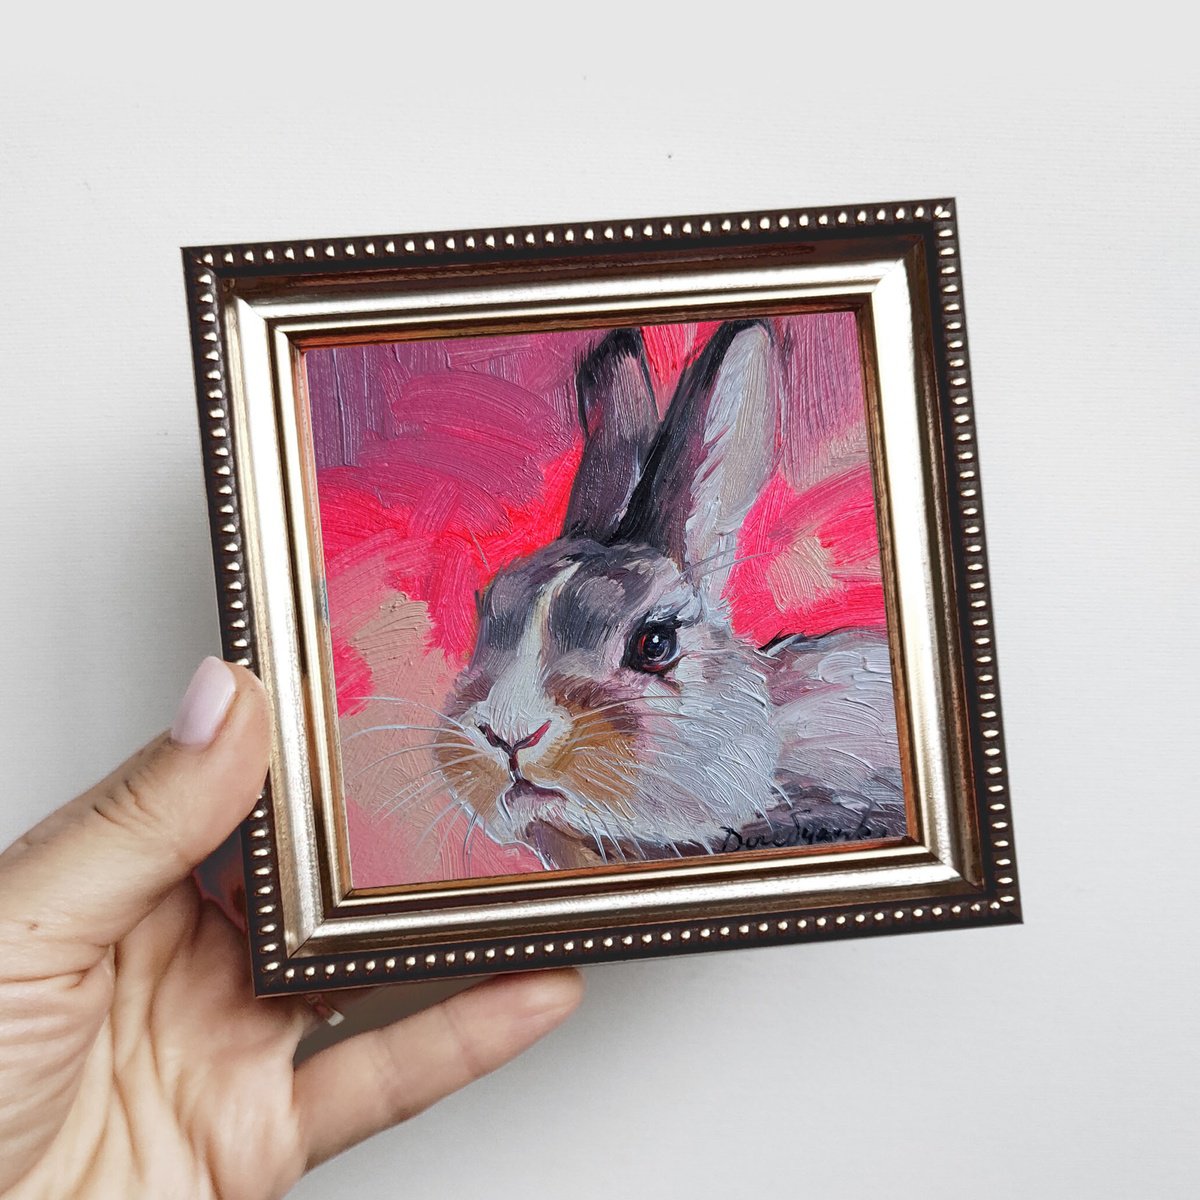 White rabbit painting original oil picture framed 4x4, Small framed art pink rabbit girl g... by Nataly Derevyanko